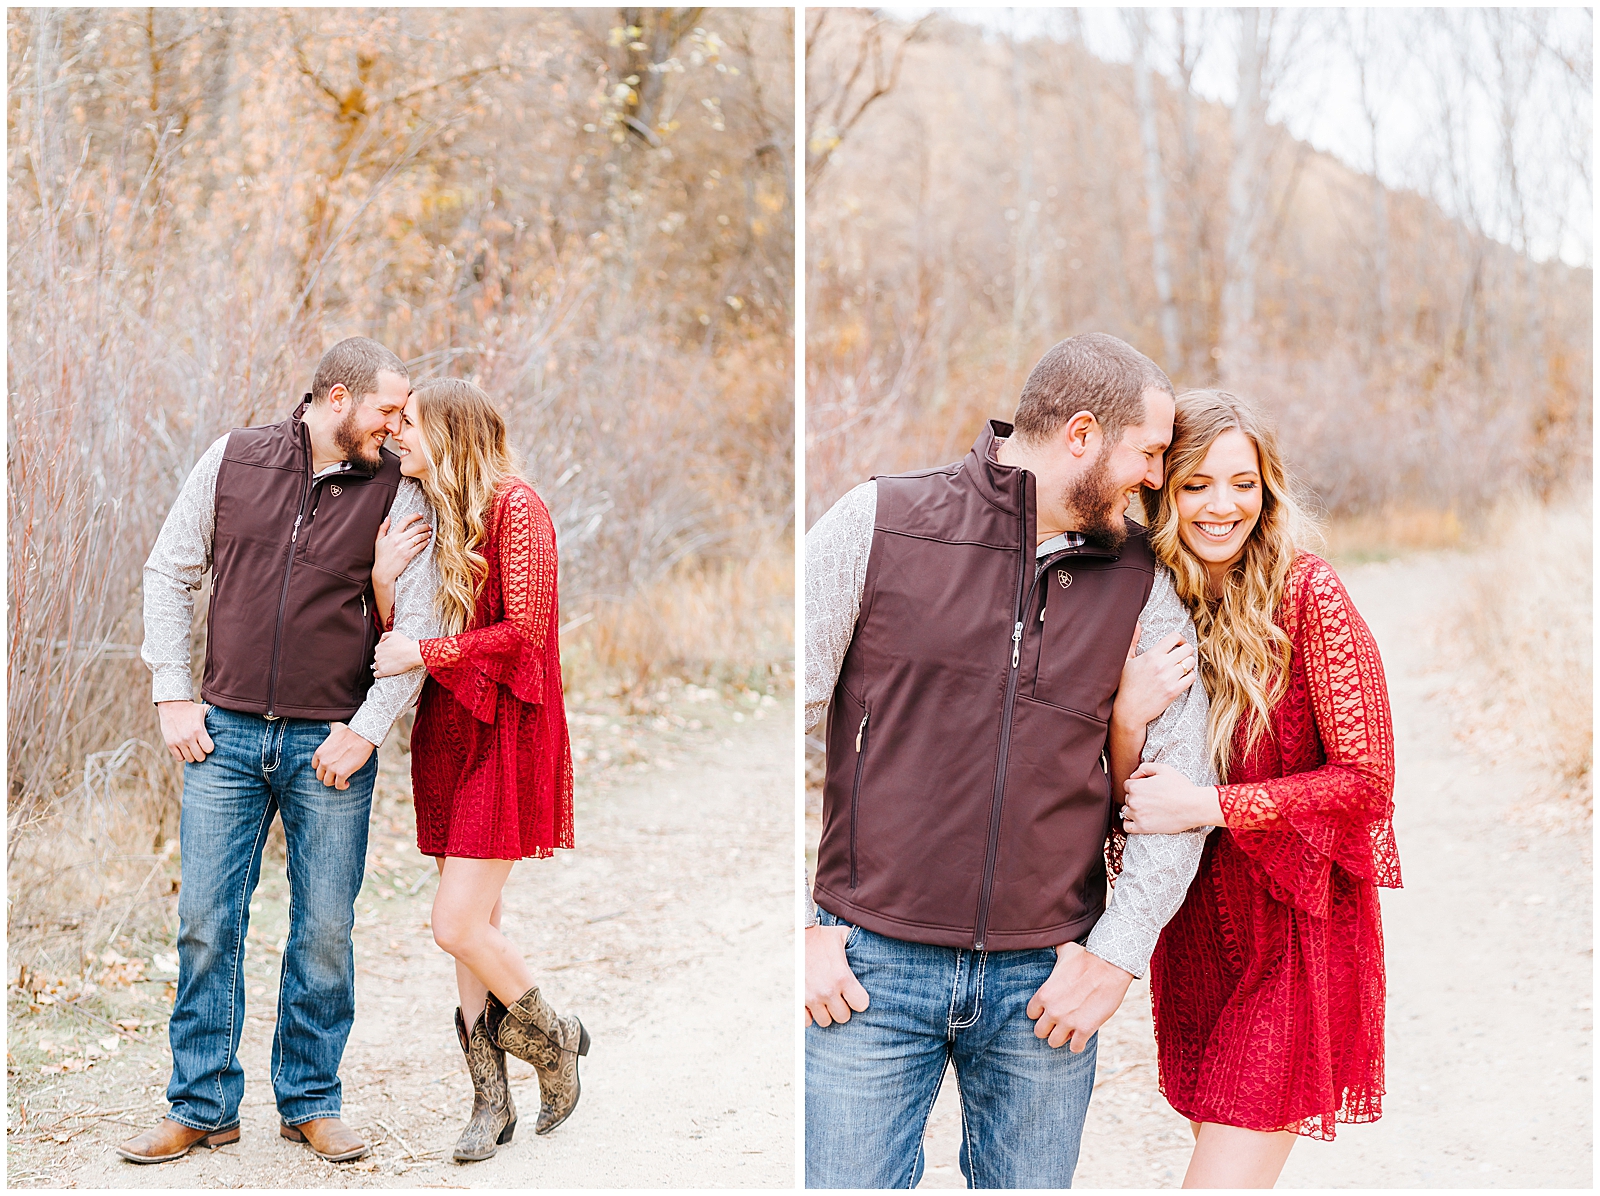 Boise Idaho Engagement Photos in the Foothills